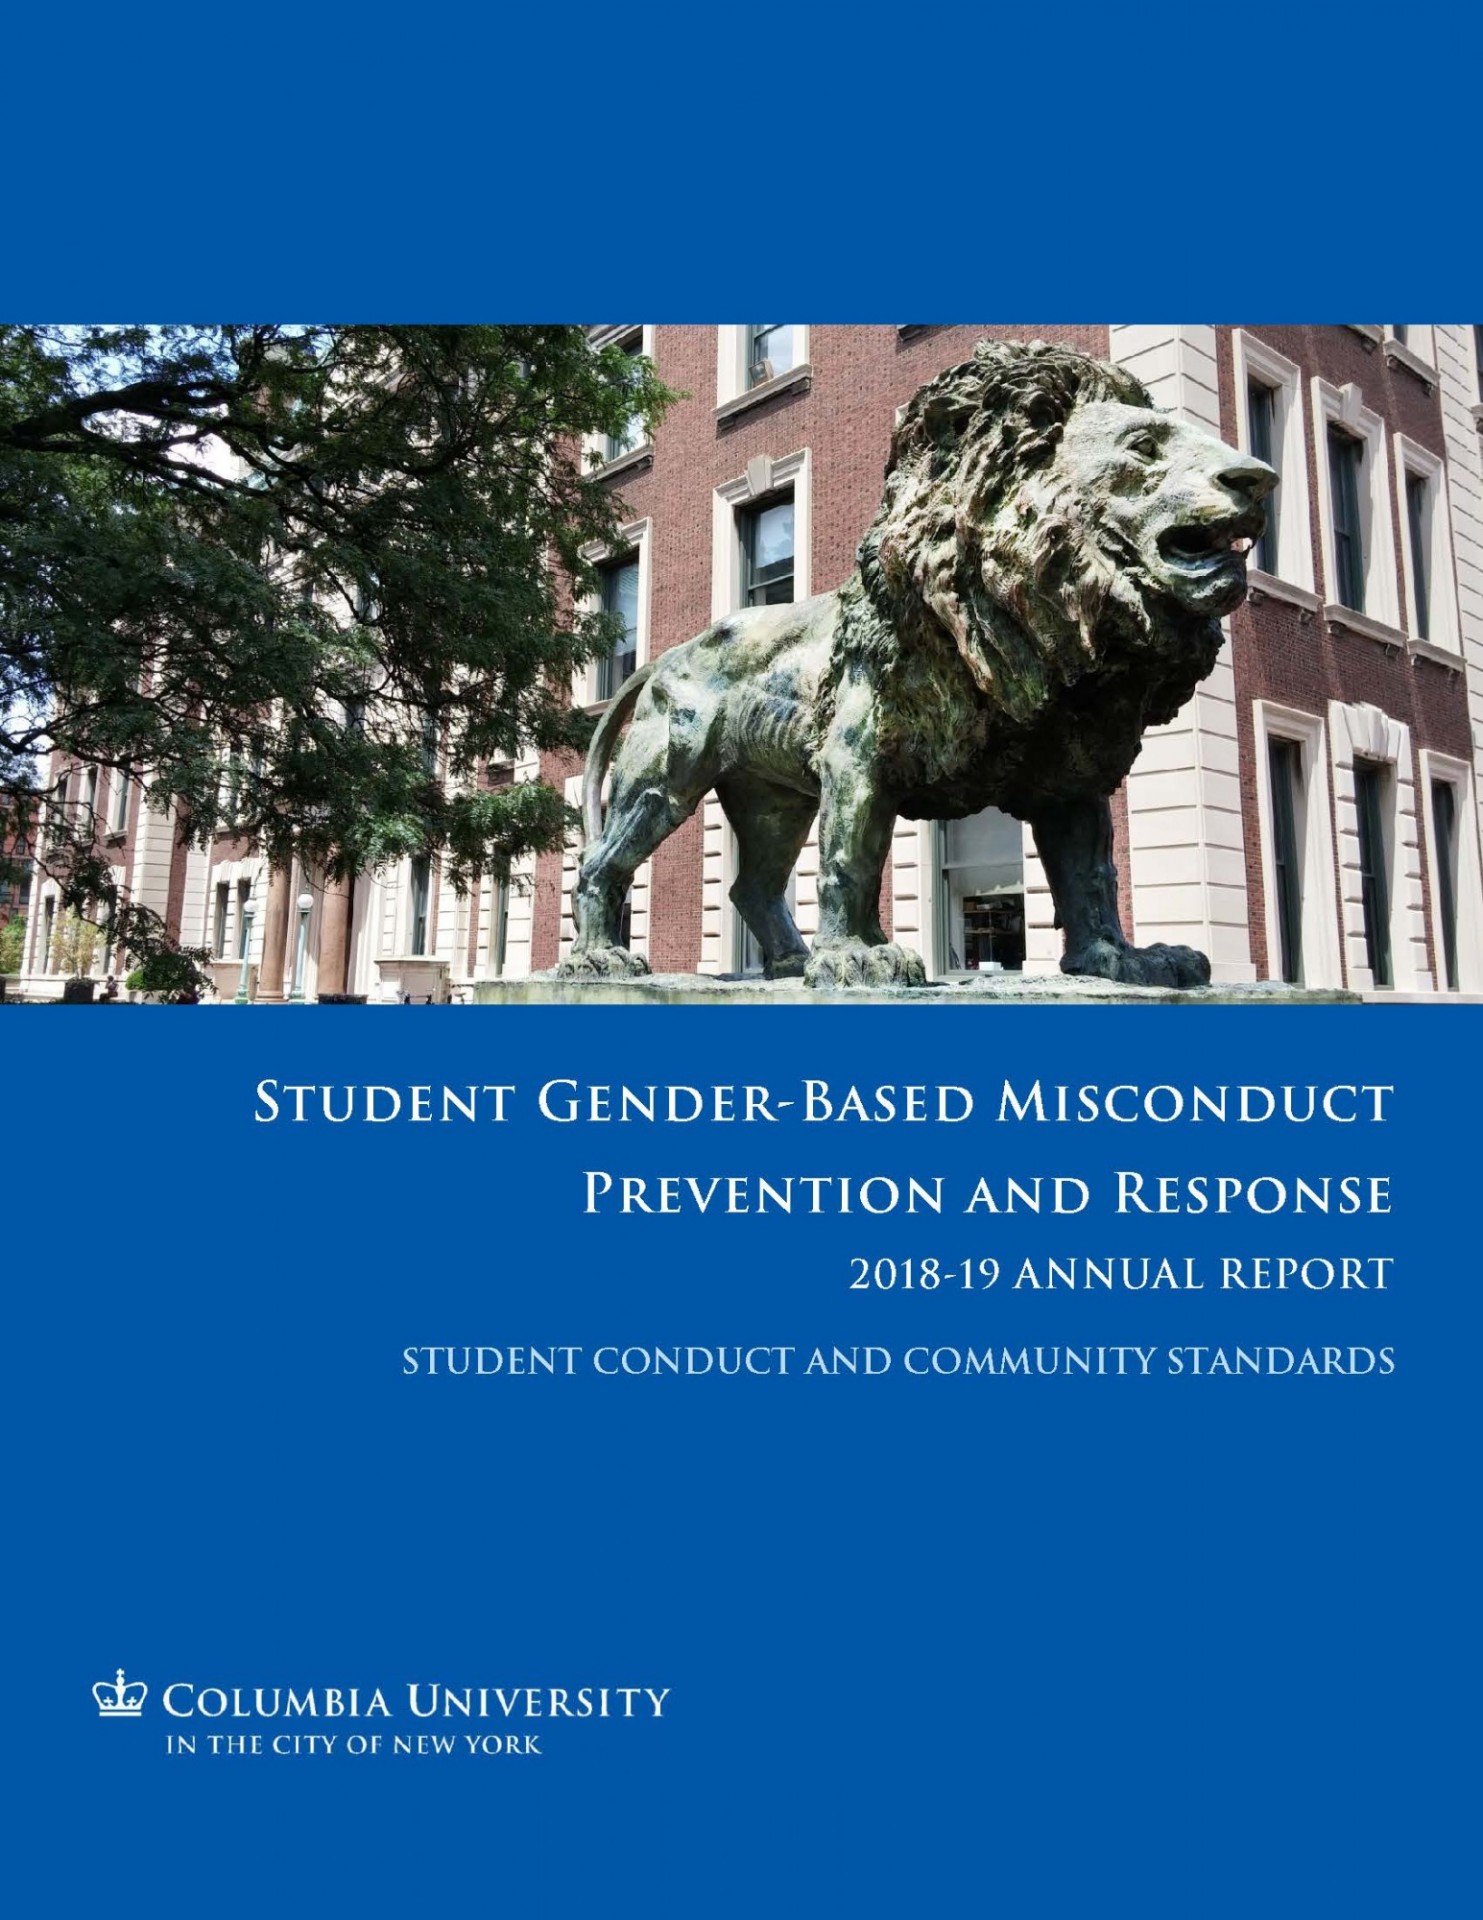 Cover of 2018-19 Annual Report on Gender-Based Misconduct Prevention and Response at Columbia University